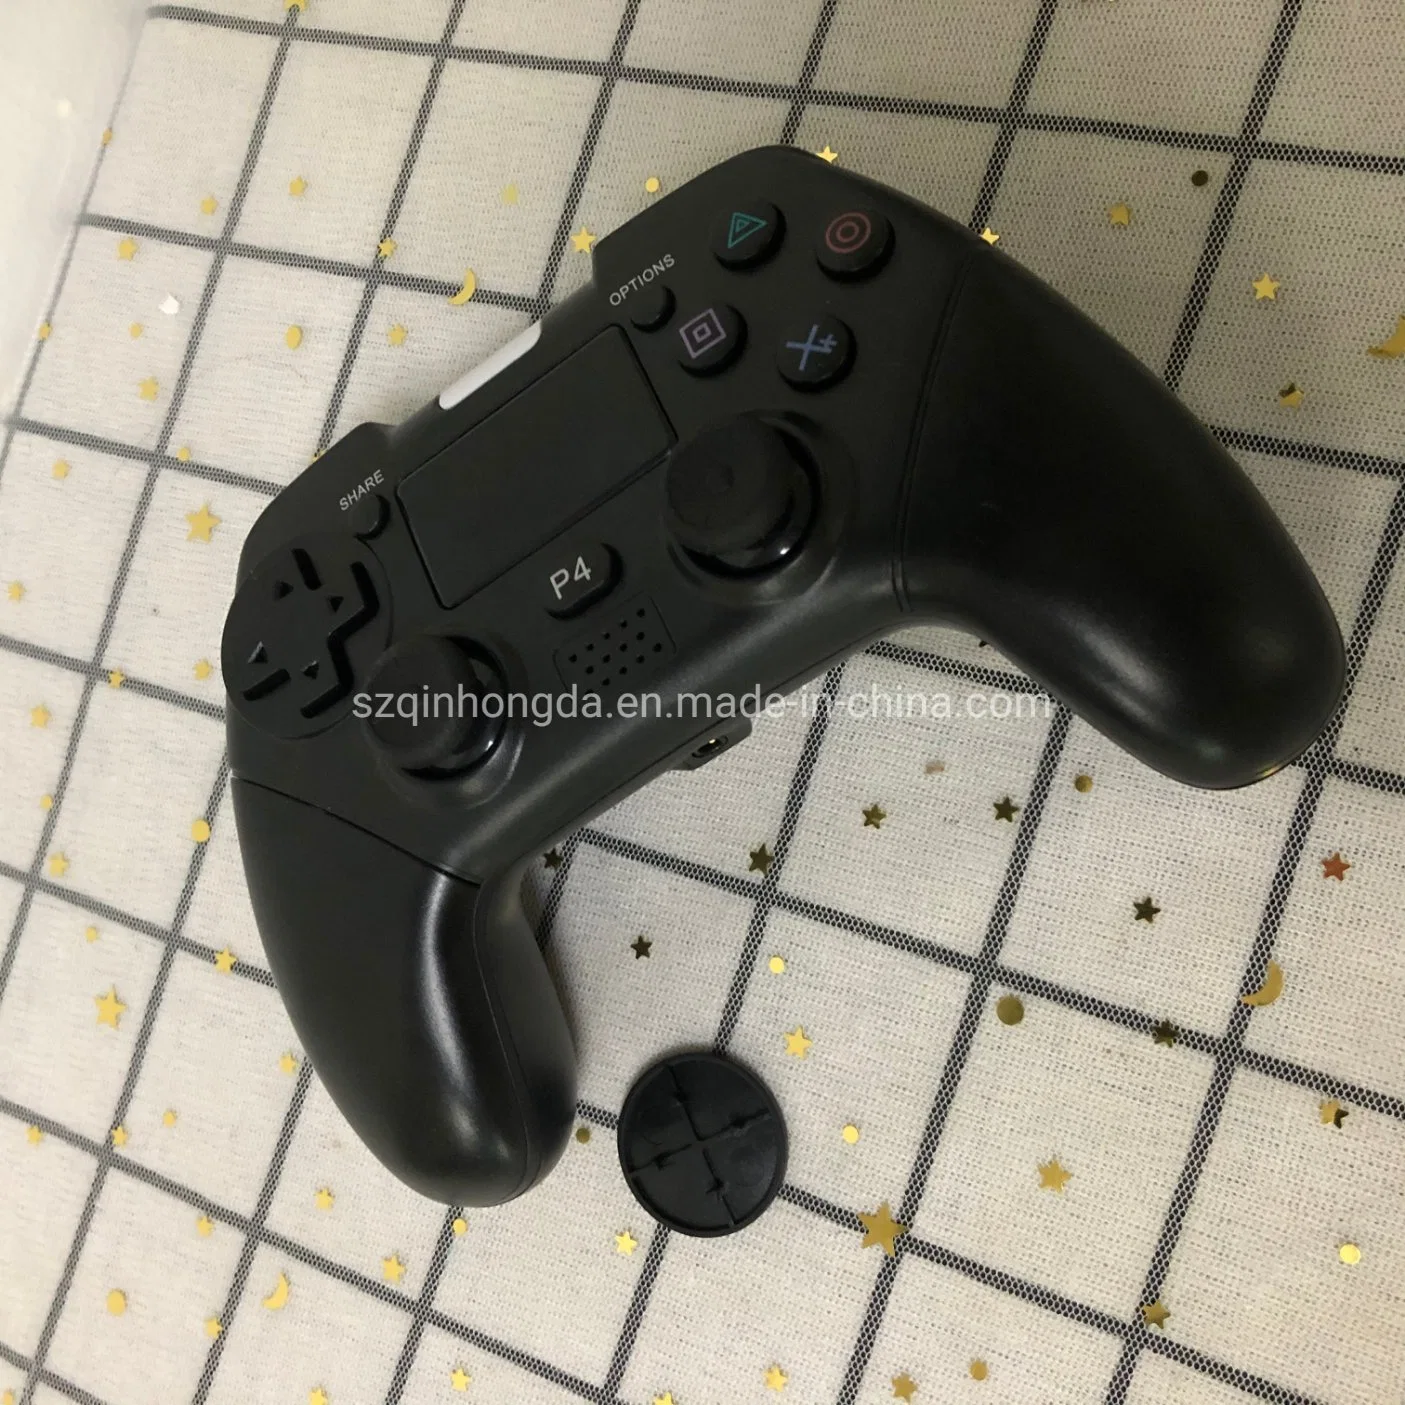 Portable Game Accessories for PS4 Controller with Stable Bluetooth Wireless Connection